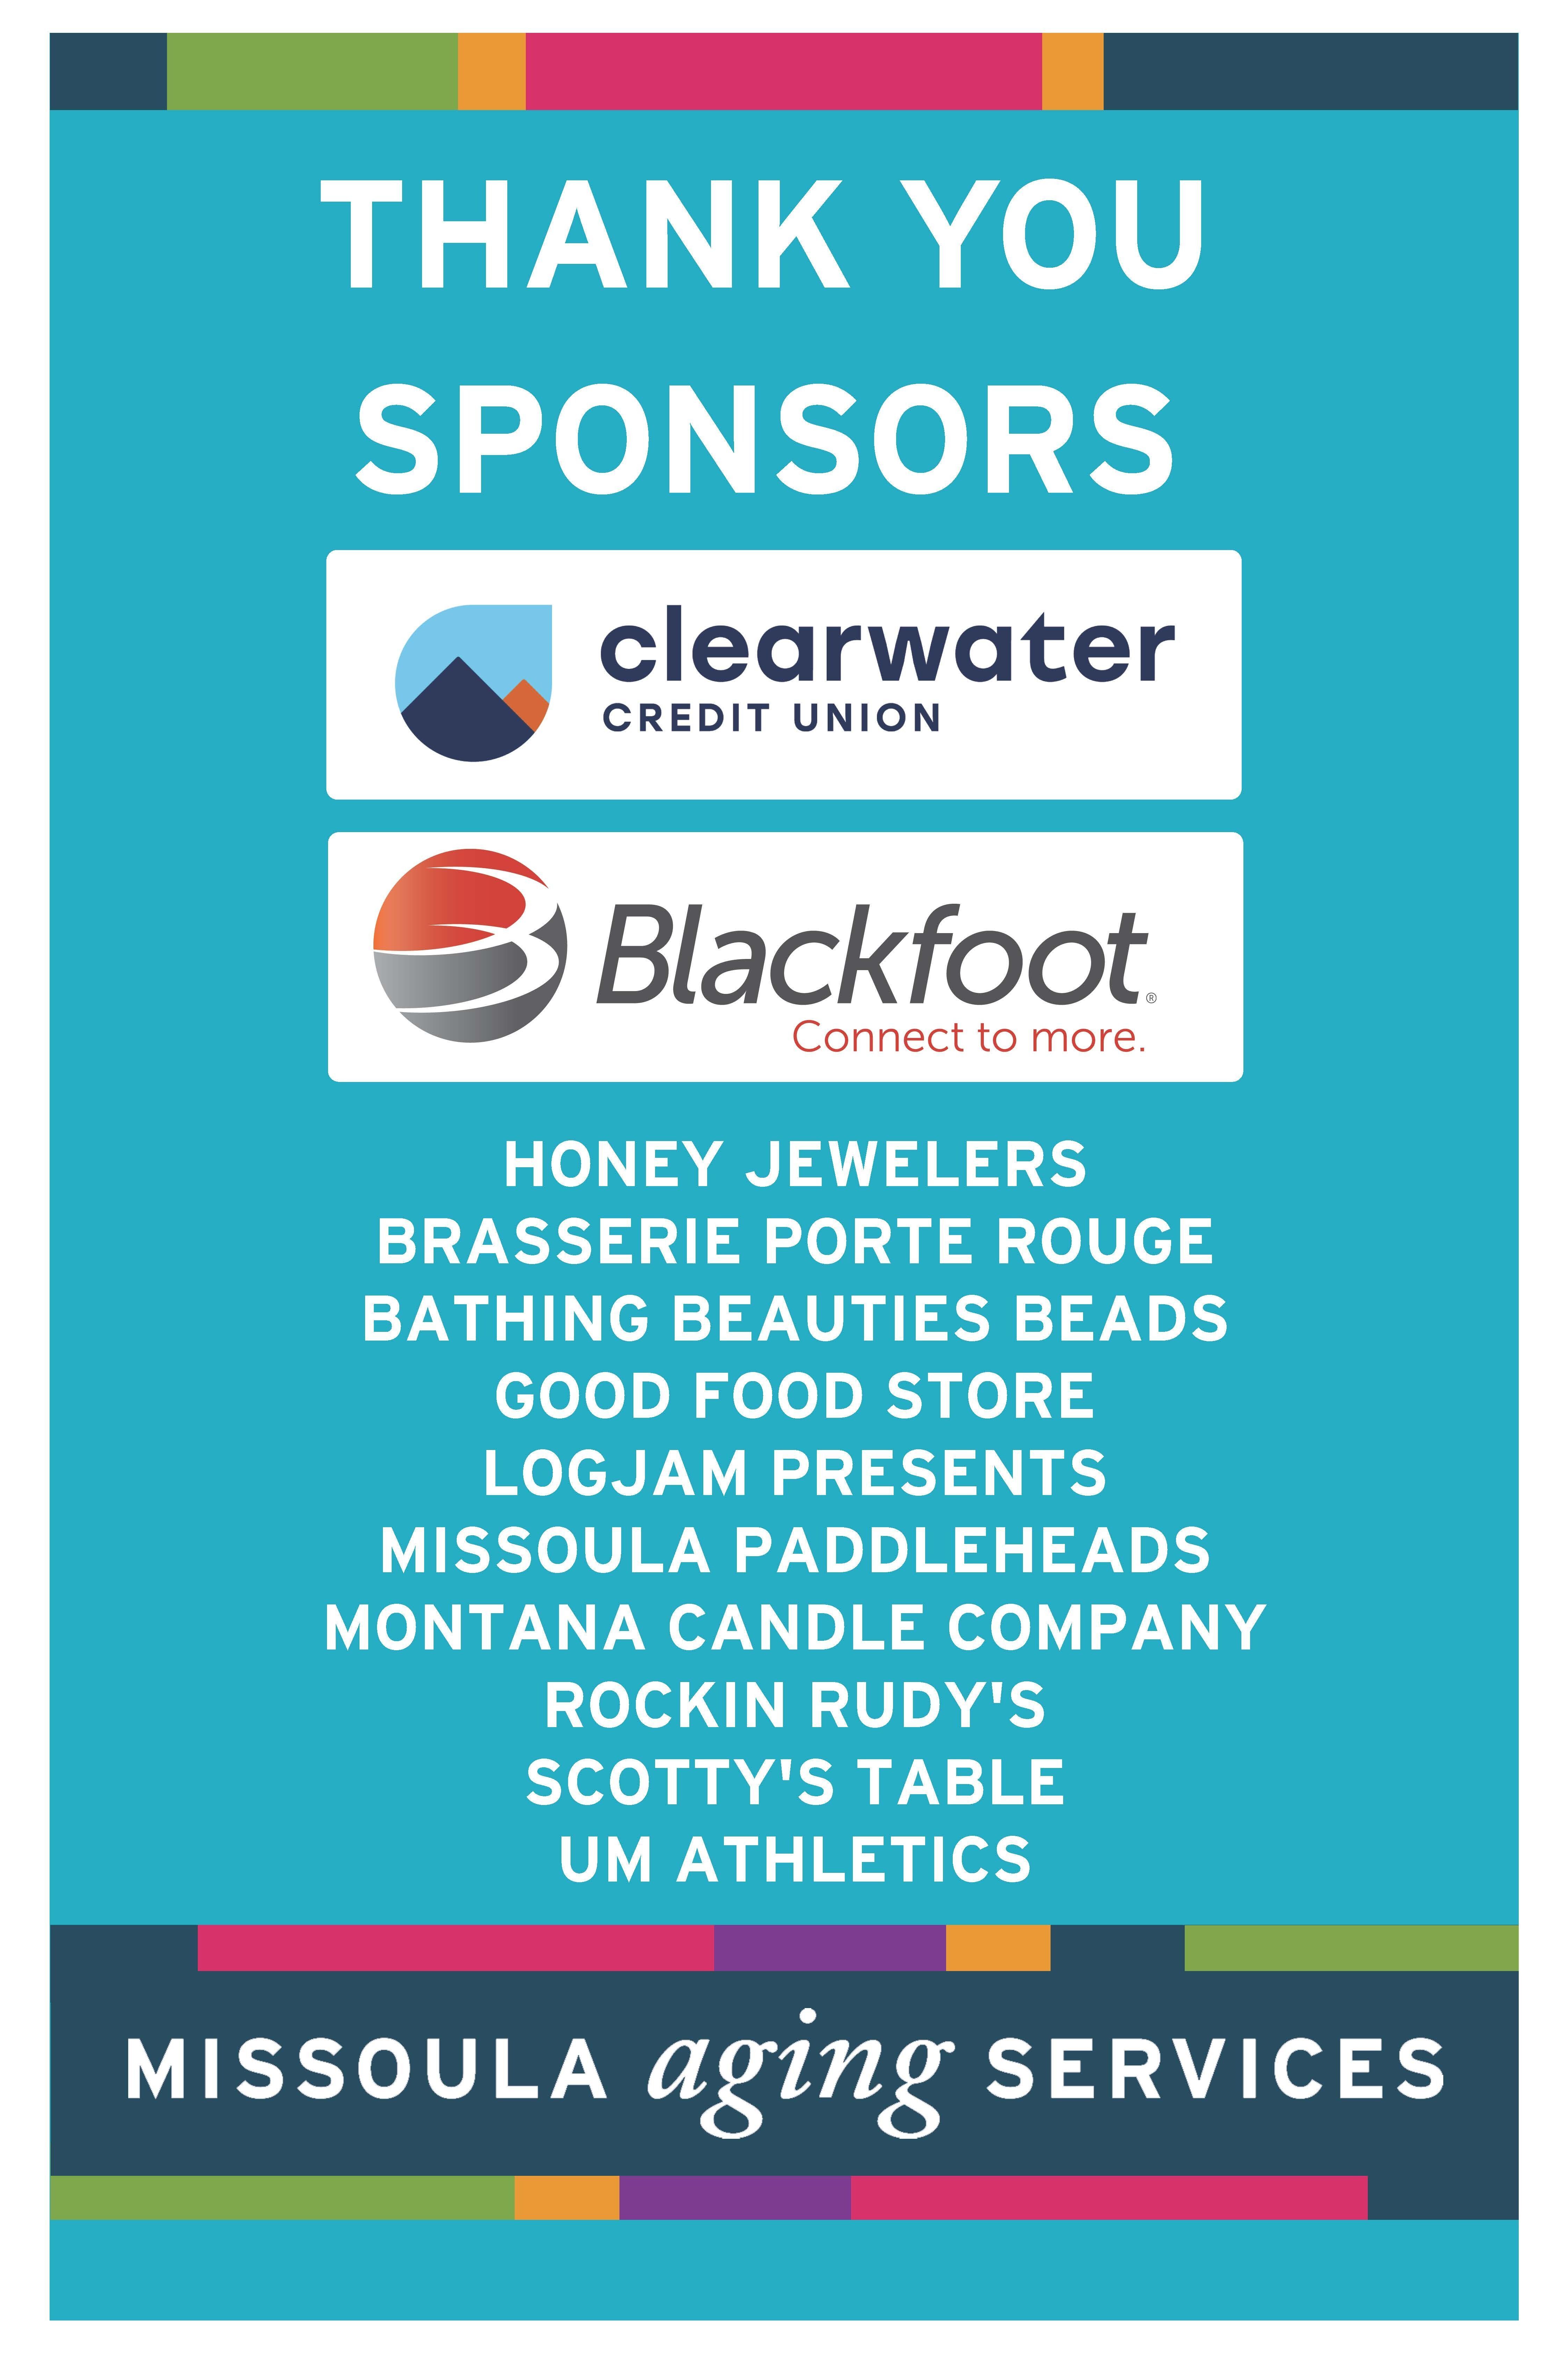 Thank you Sponsors List including Clearwater Credit Union link